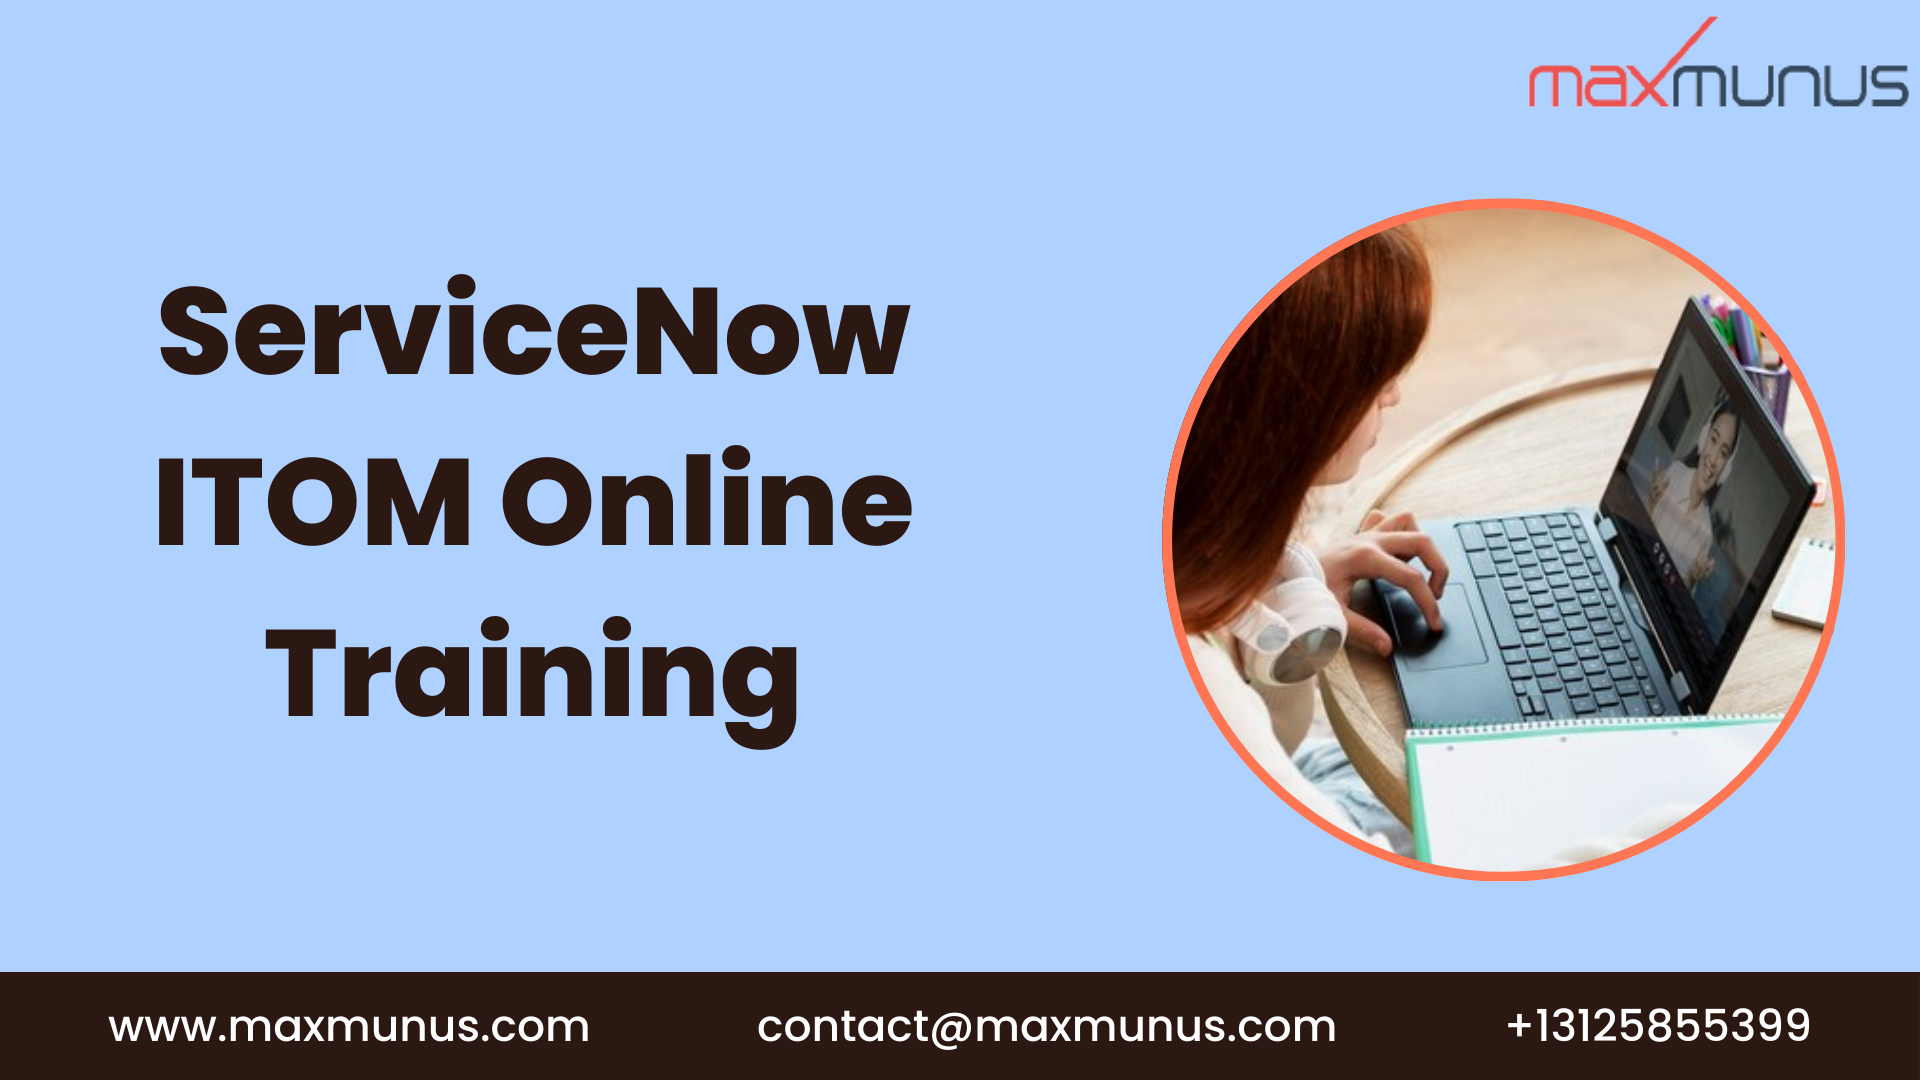 How does ServiceNow ITOM Training differ from other IT operations management training programs? | TechPlanet